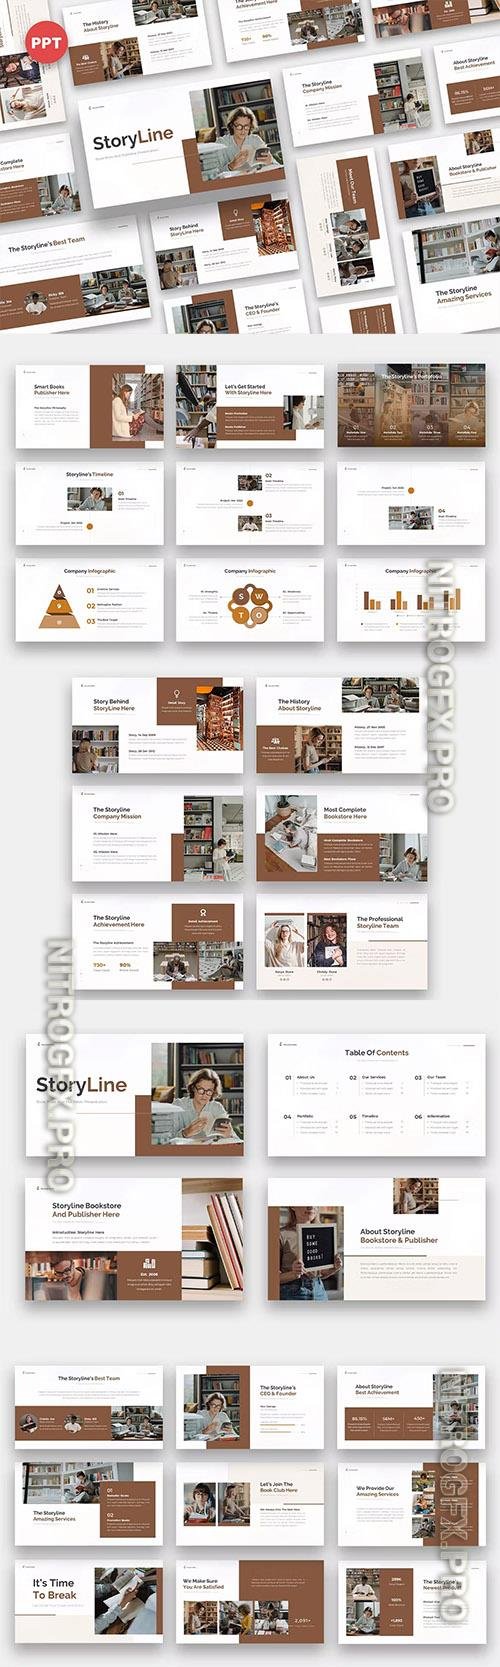 Storyline - Bookstore & Publisher Powerpoint and Keynote Templates